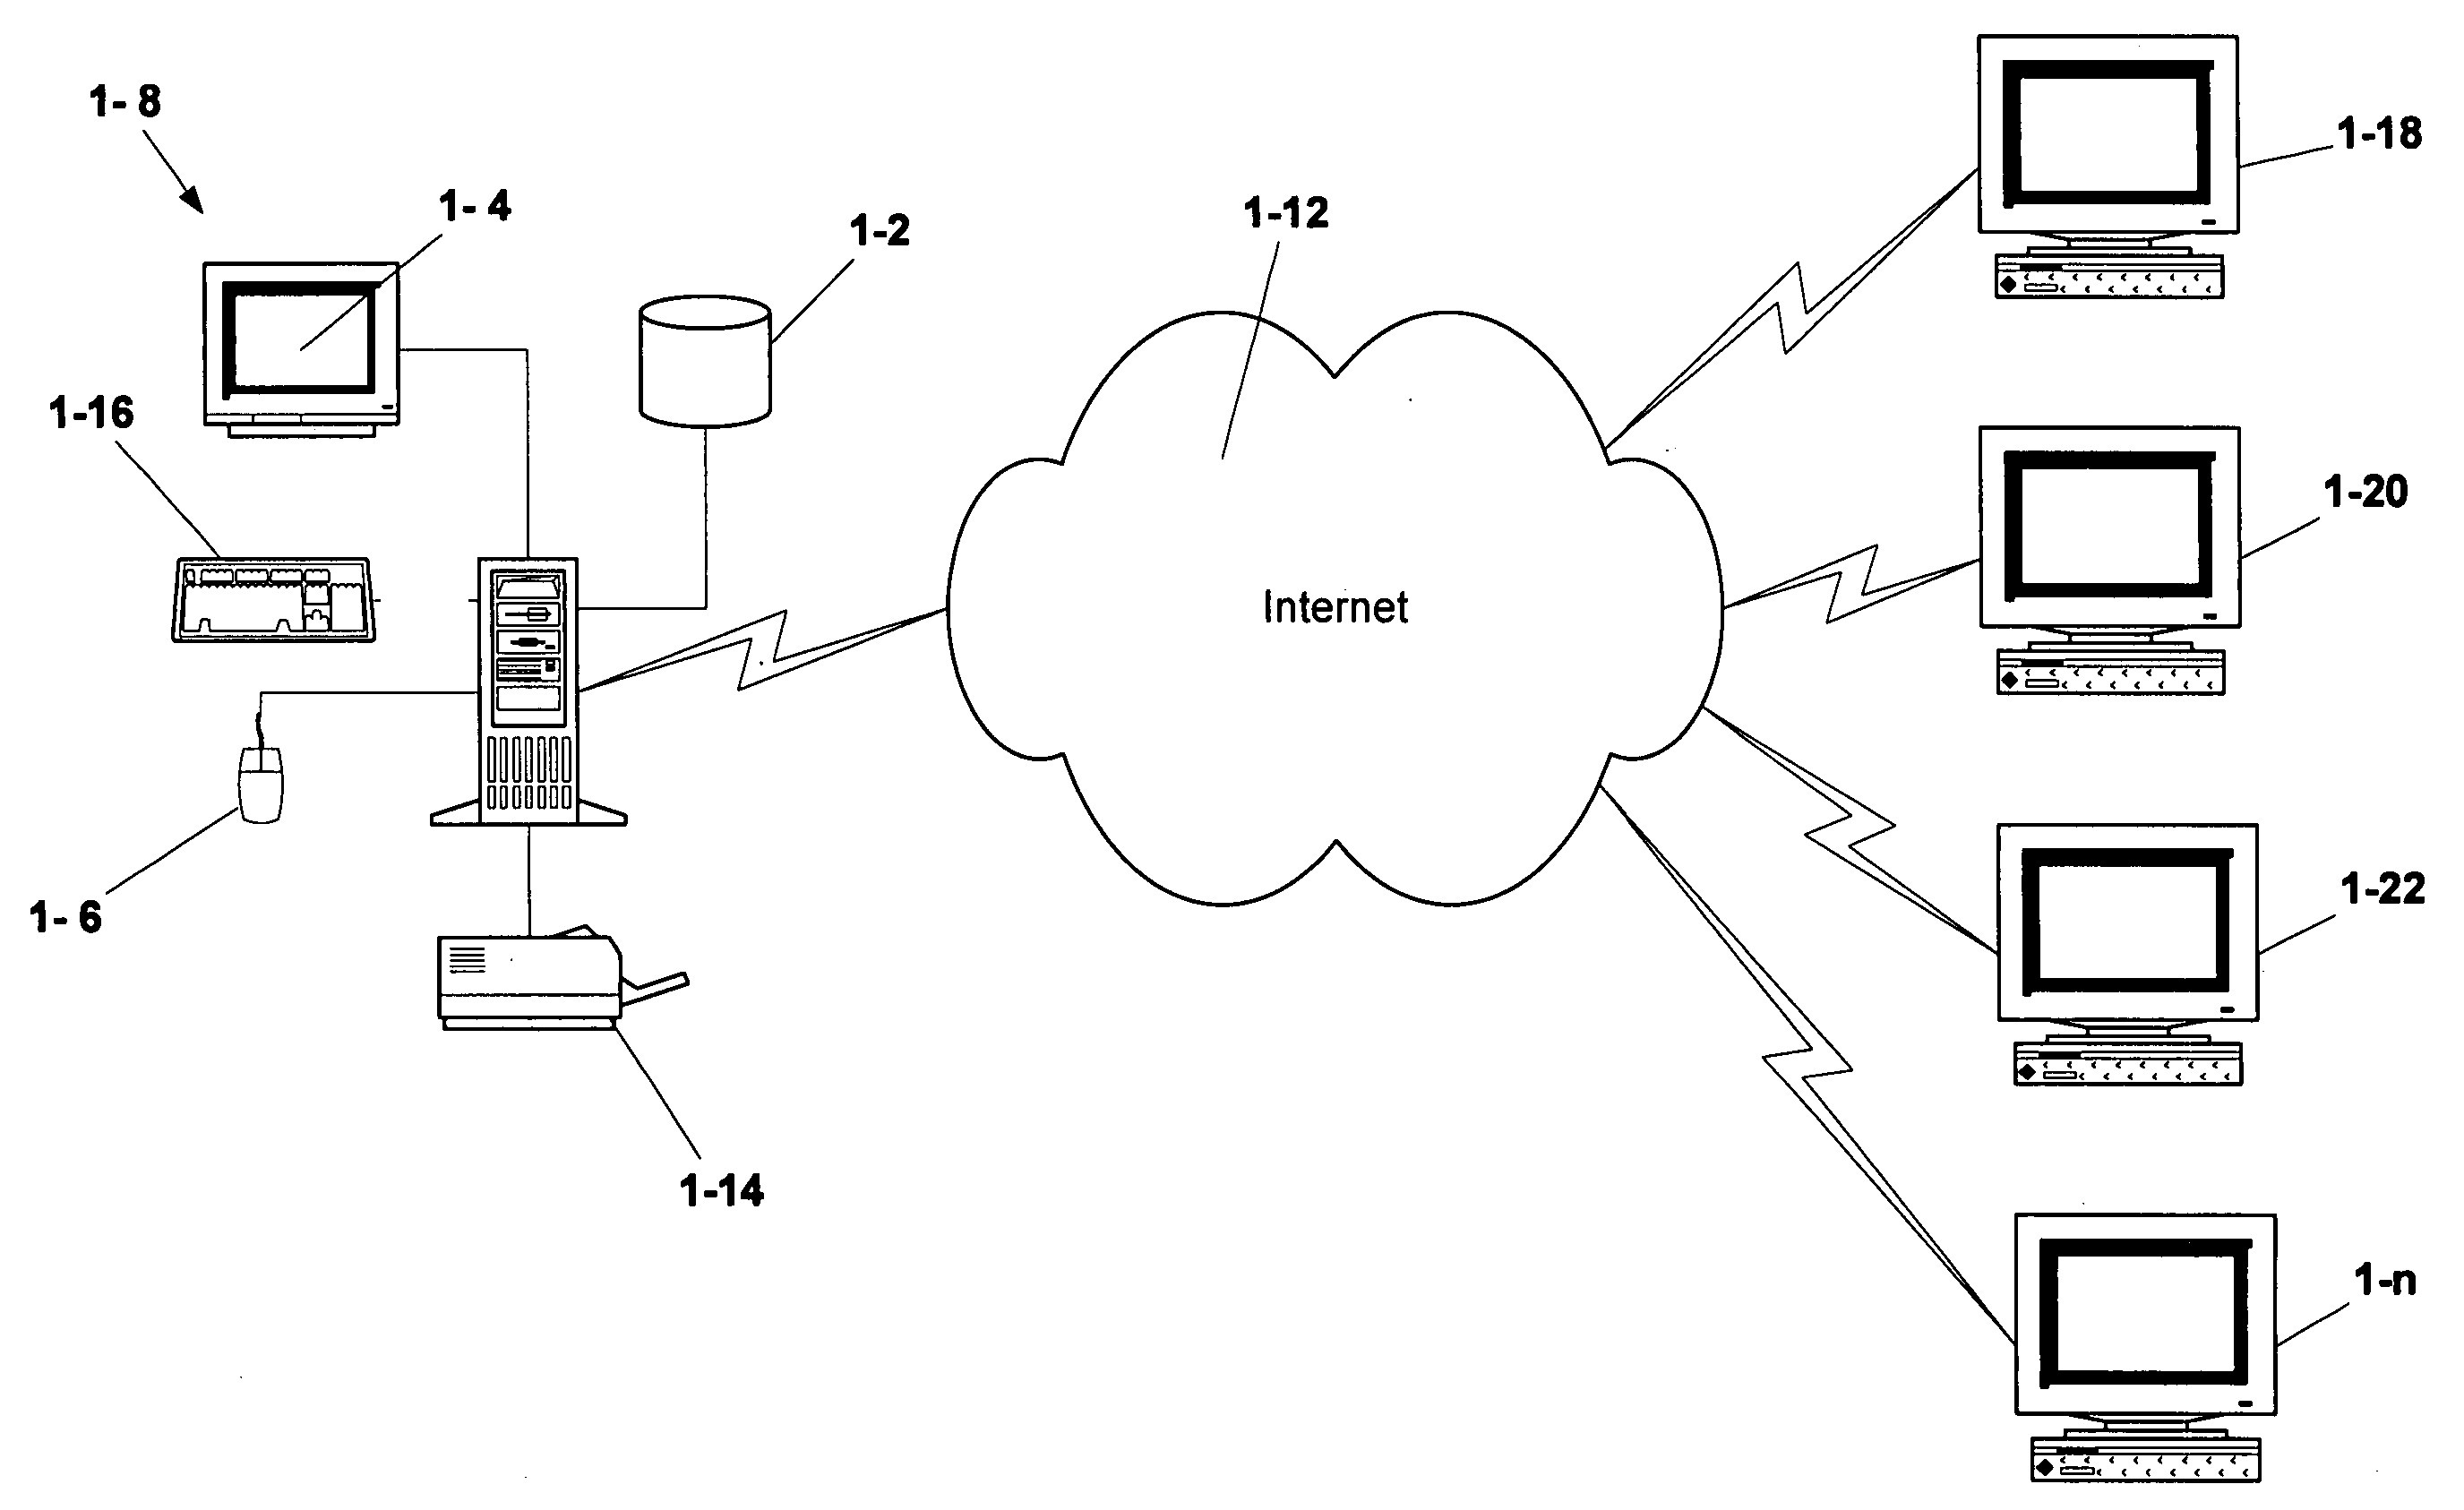 Content management system for creating and maintaining a database of information utilizing user experiences